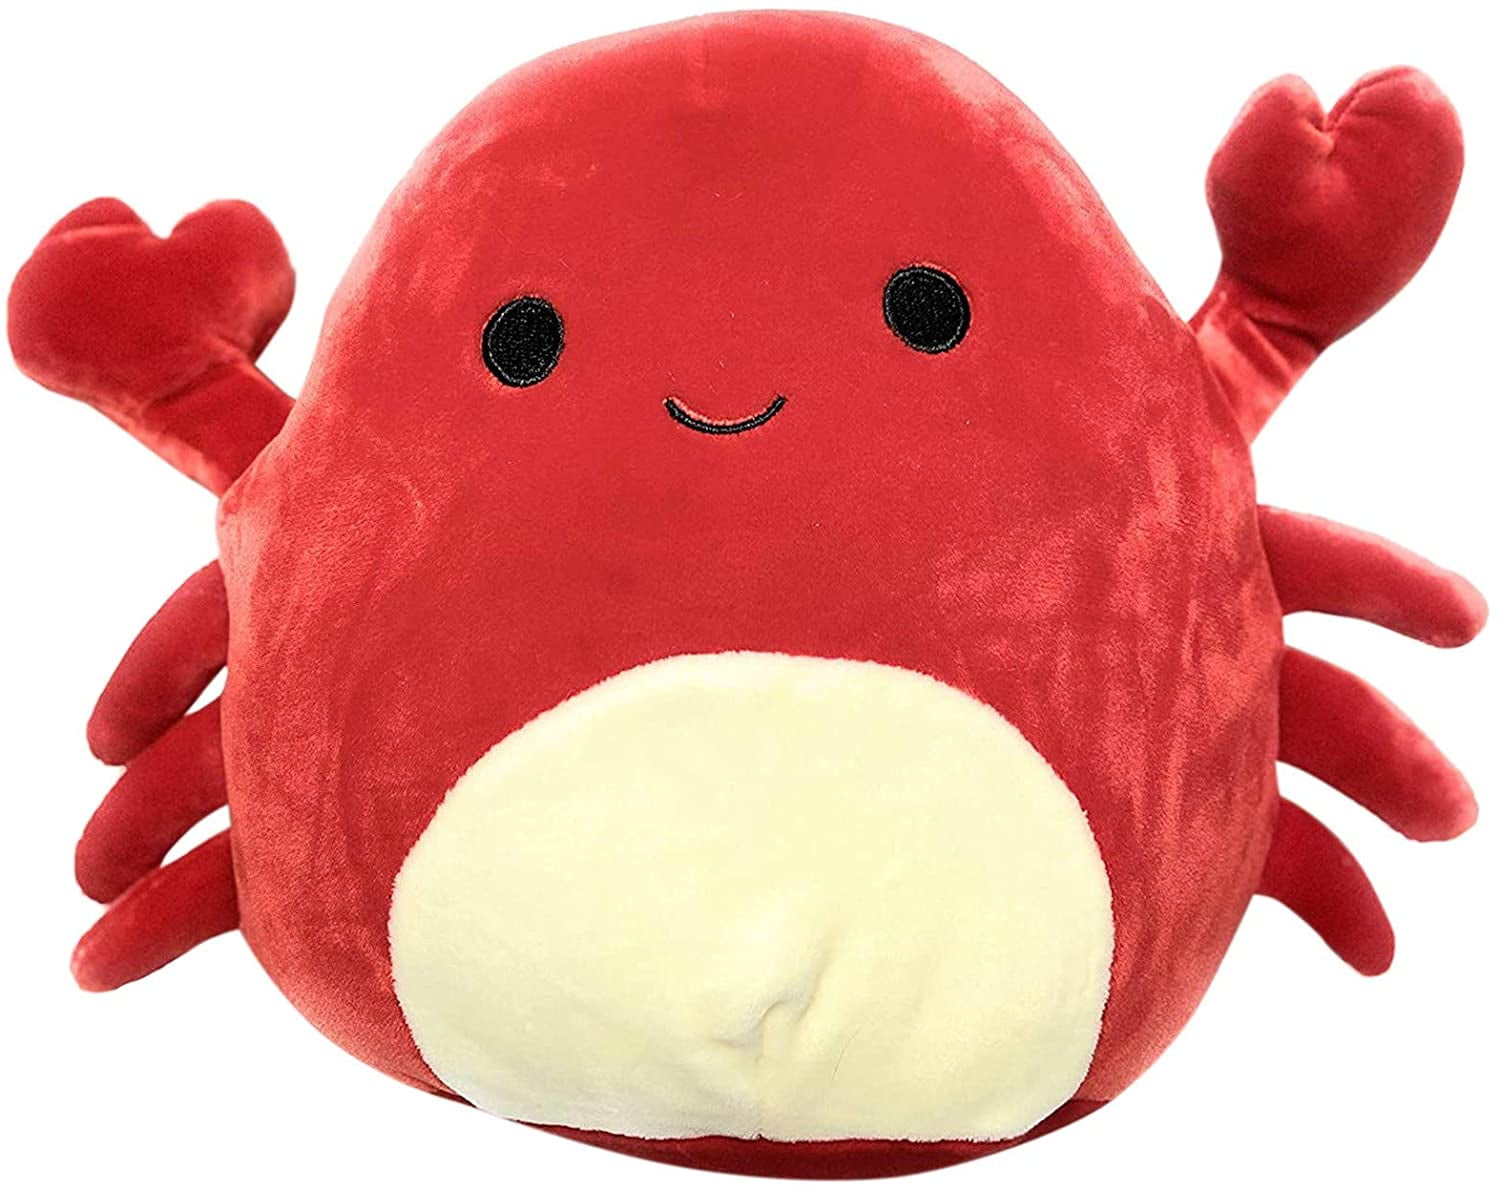 THE CALICO CRAB SOFT TOY PILLOW SMALL 23.62" FREE SHIPPING 